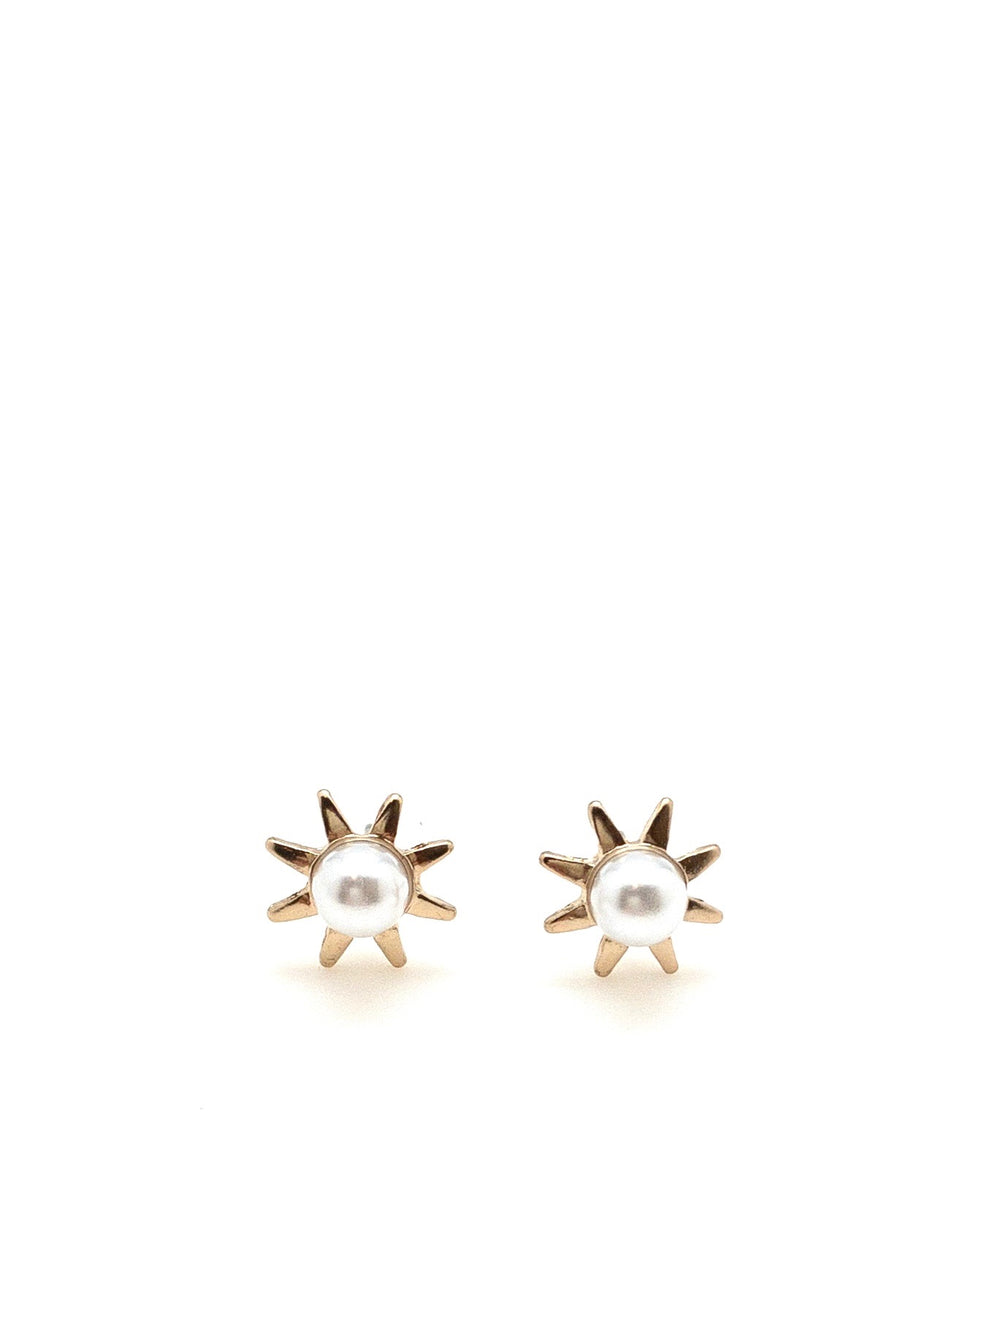 Sunni earrings with pearl in center gold